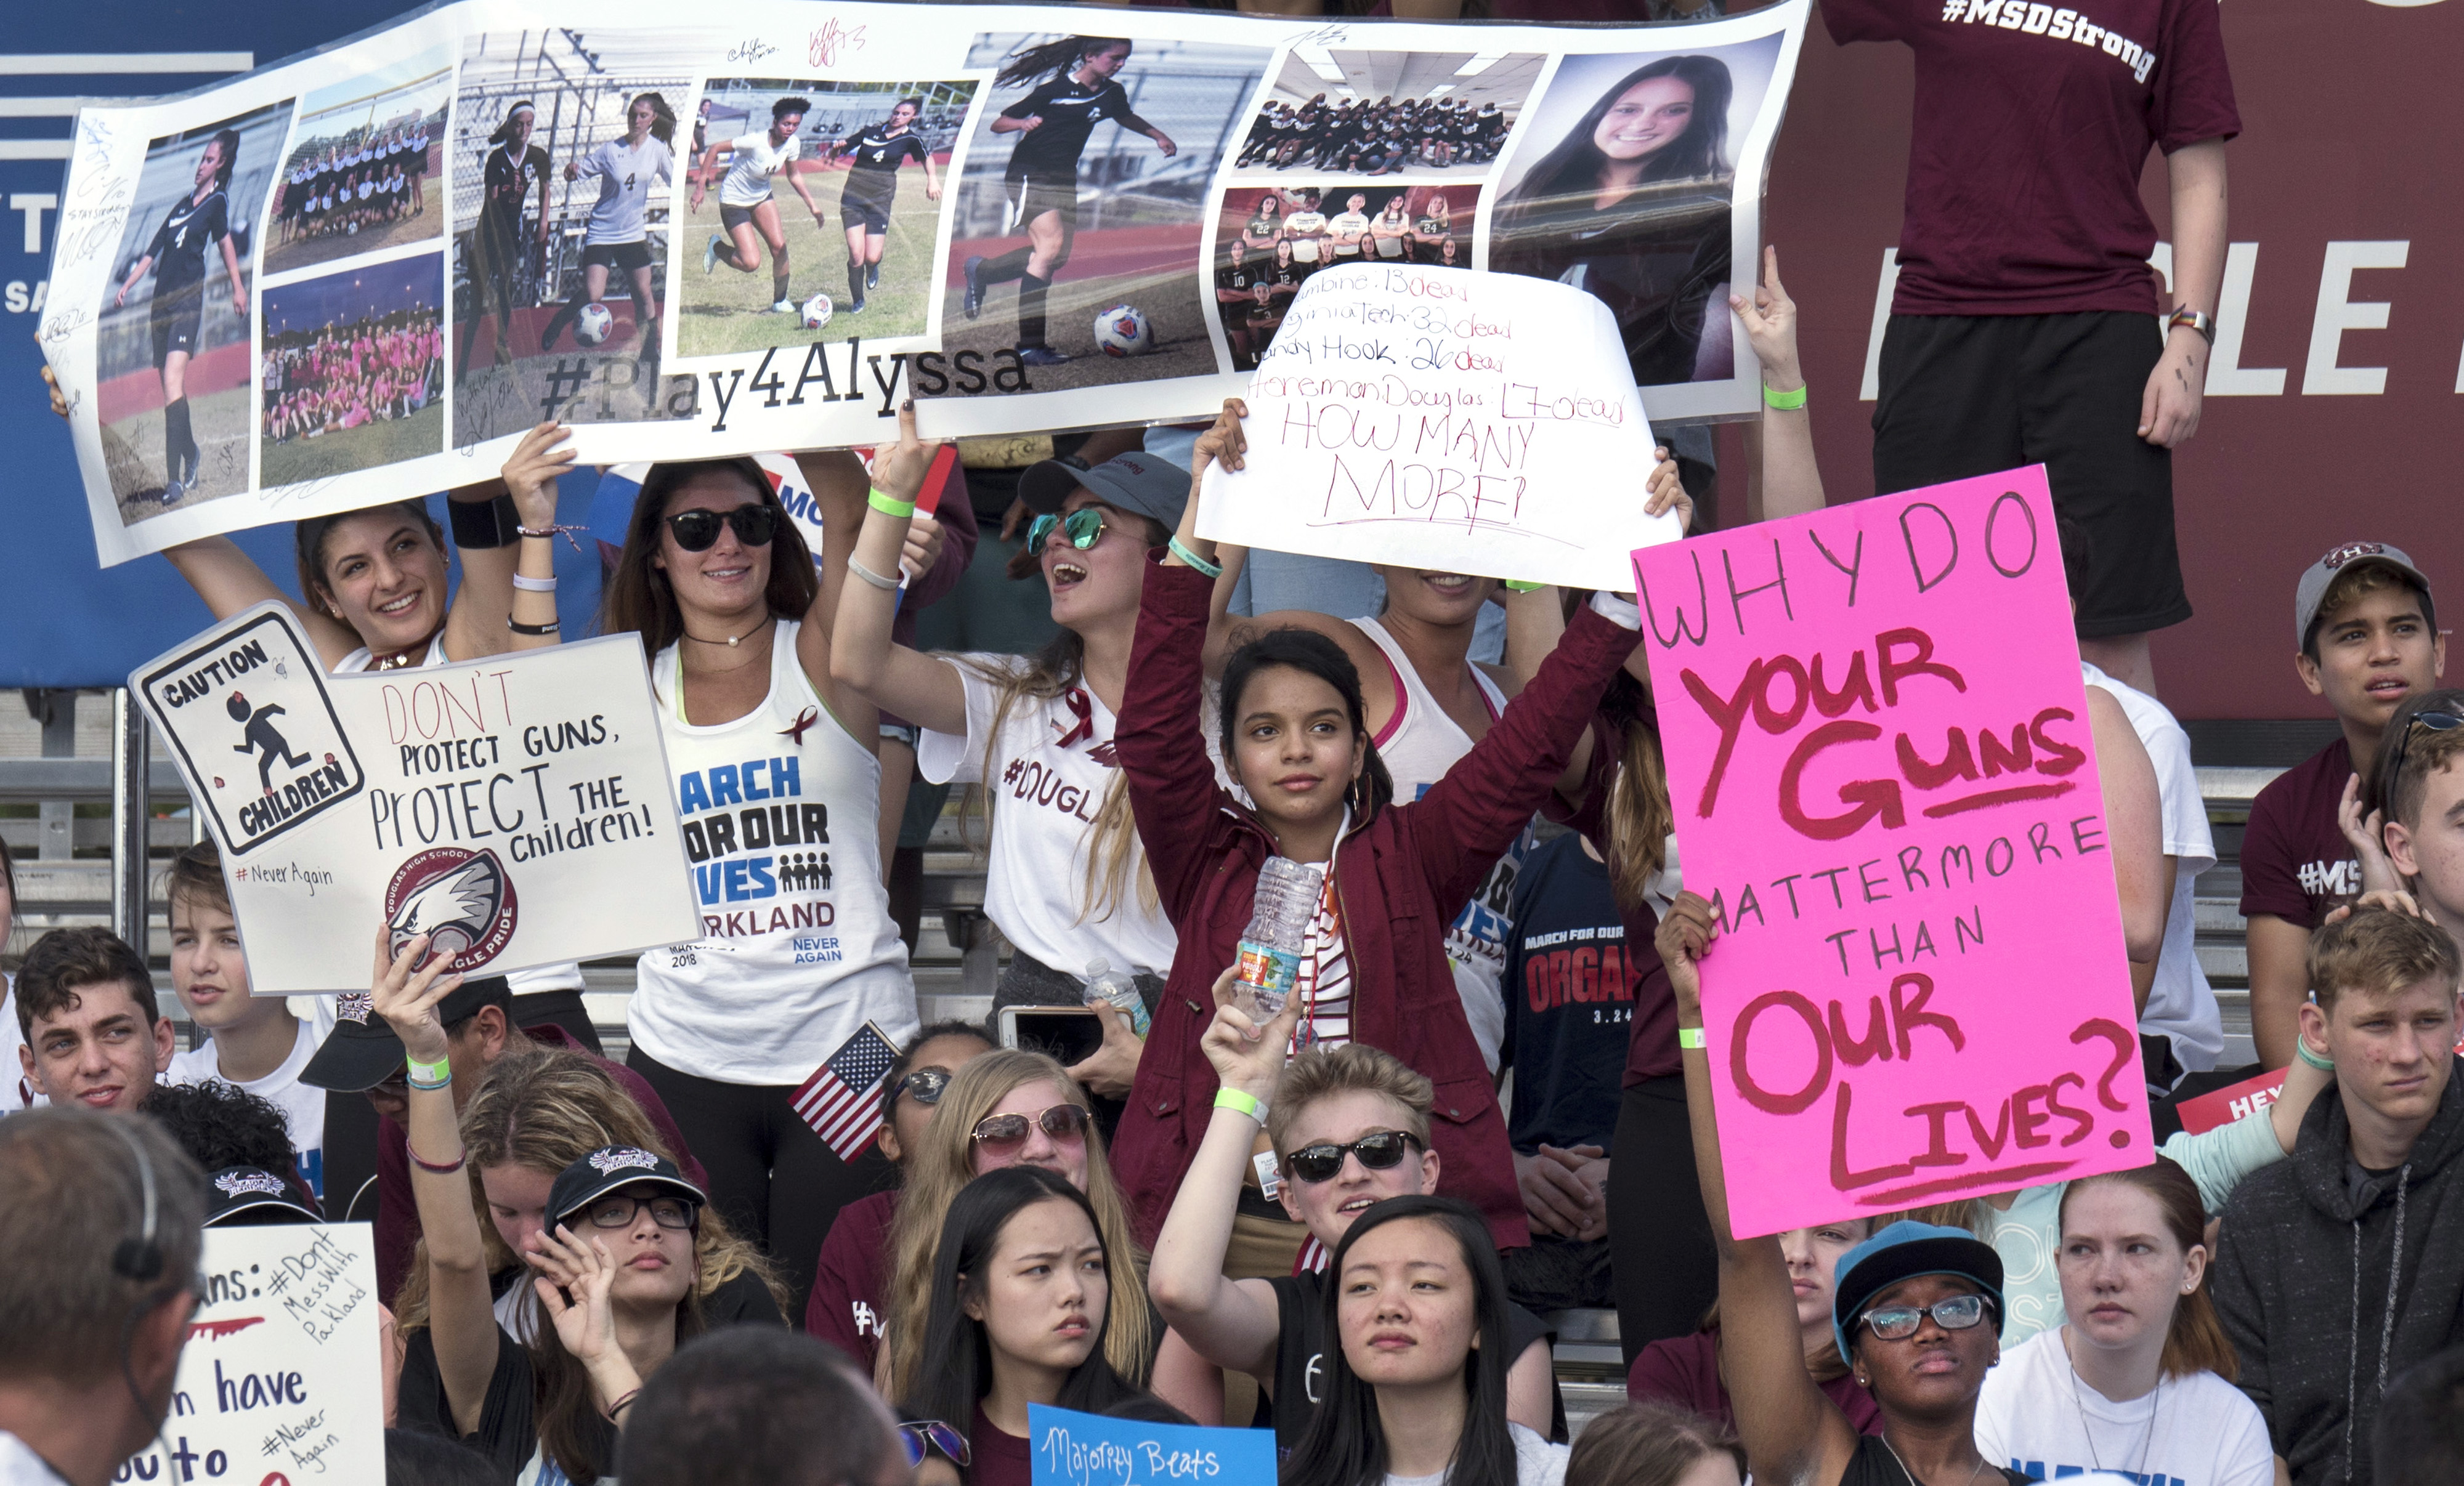 Students lined bleachers and held up handmade signs at a March for Our Lives rally in Parkland, Fla. The rally was held at a park one mile from Marjory Stoneman Douglas High School where 17 people were killed on Feb. 14. Students were calling for stricter gun laws and for greater voter turnout in elections. Photo by Kathy L. Gilbert, UMNS.